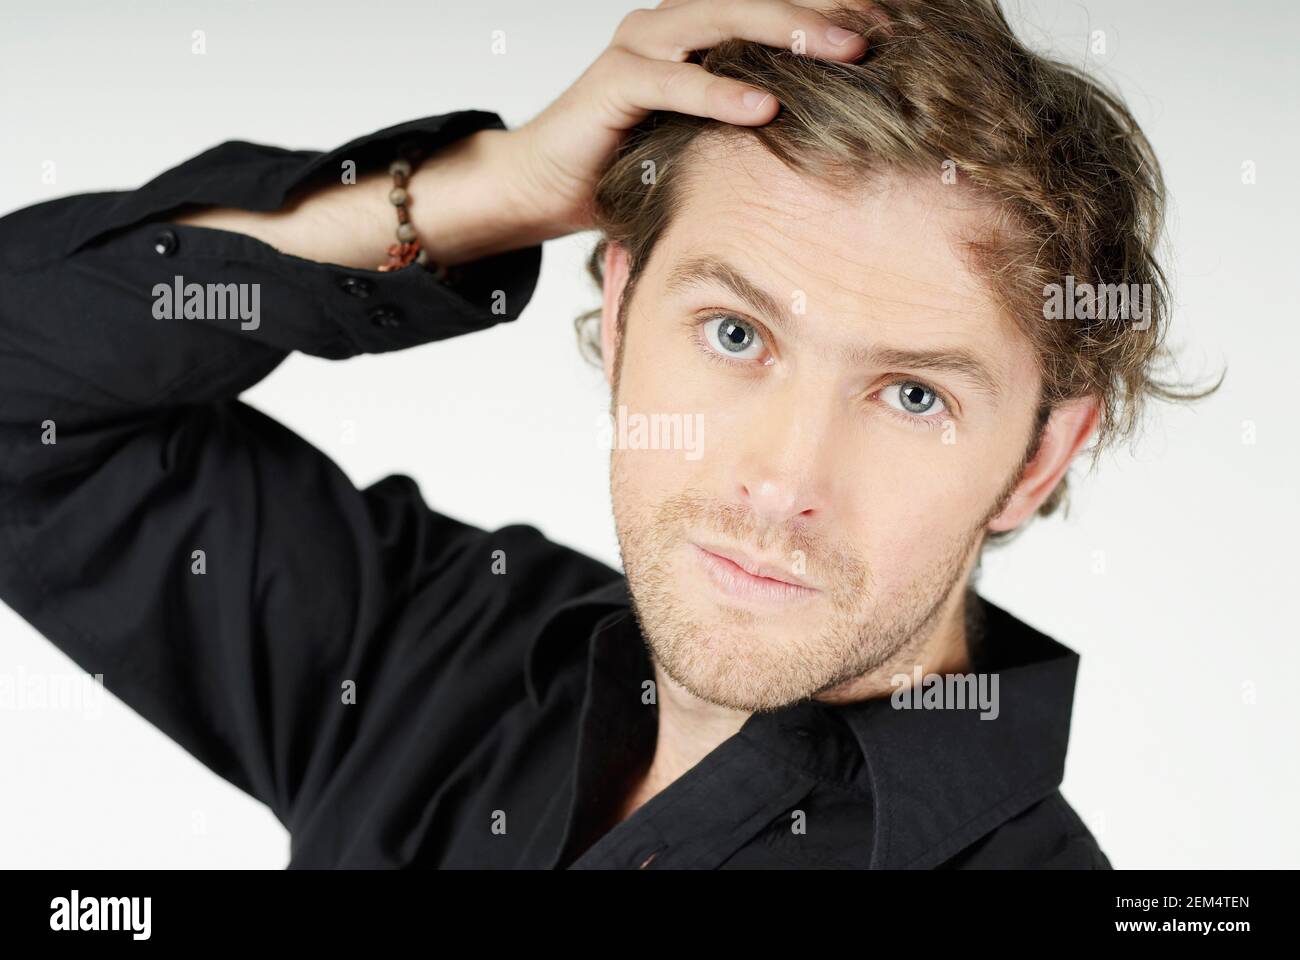 Portrait of a young man with his hand in his hair Stock Photo